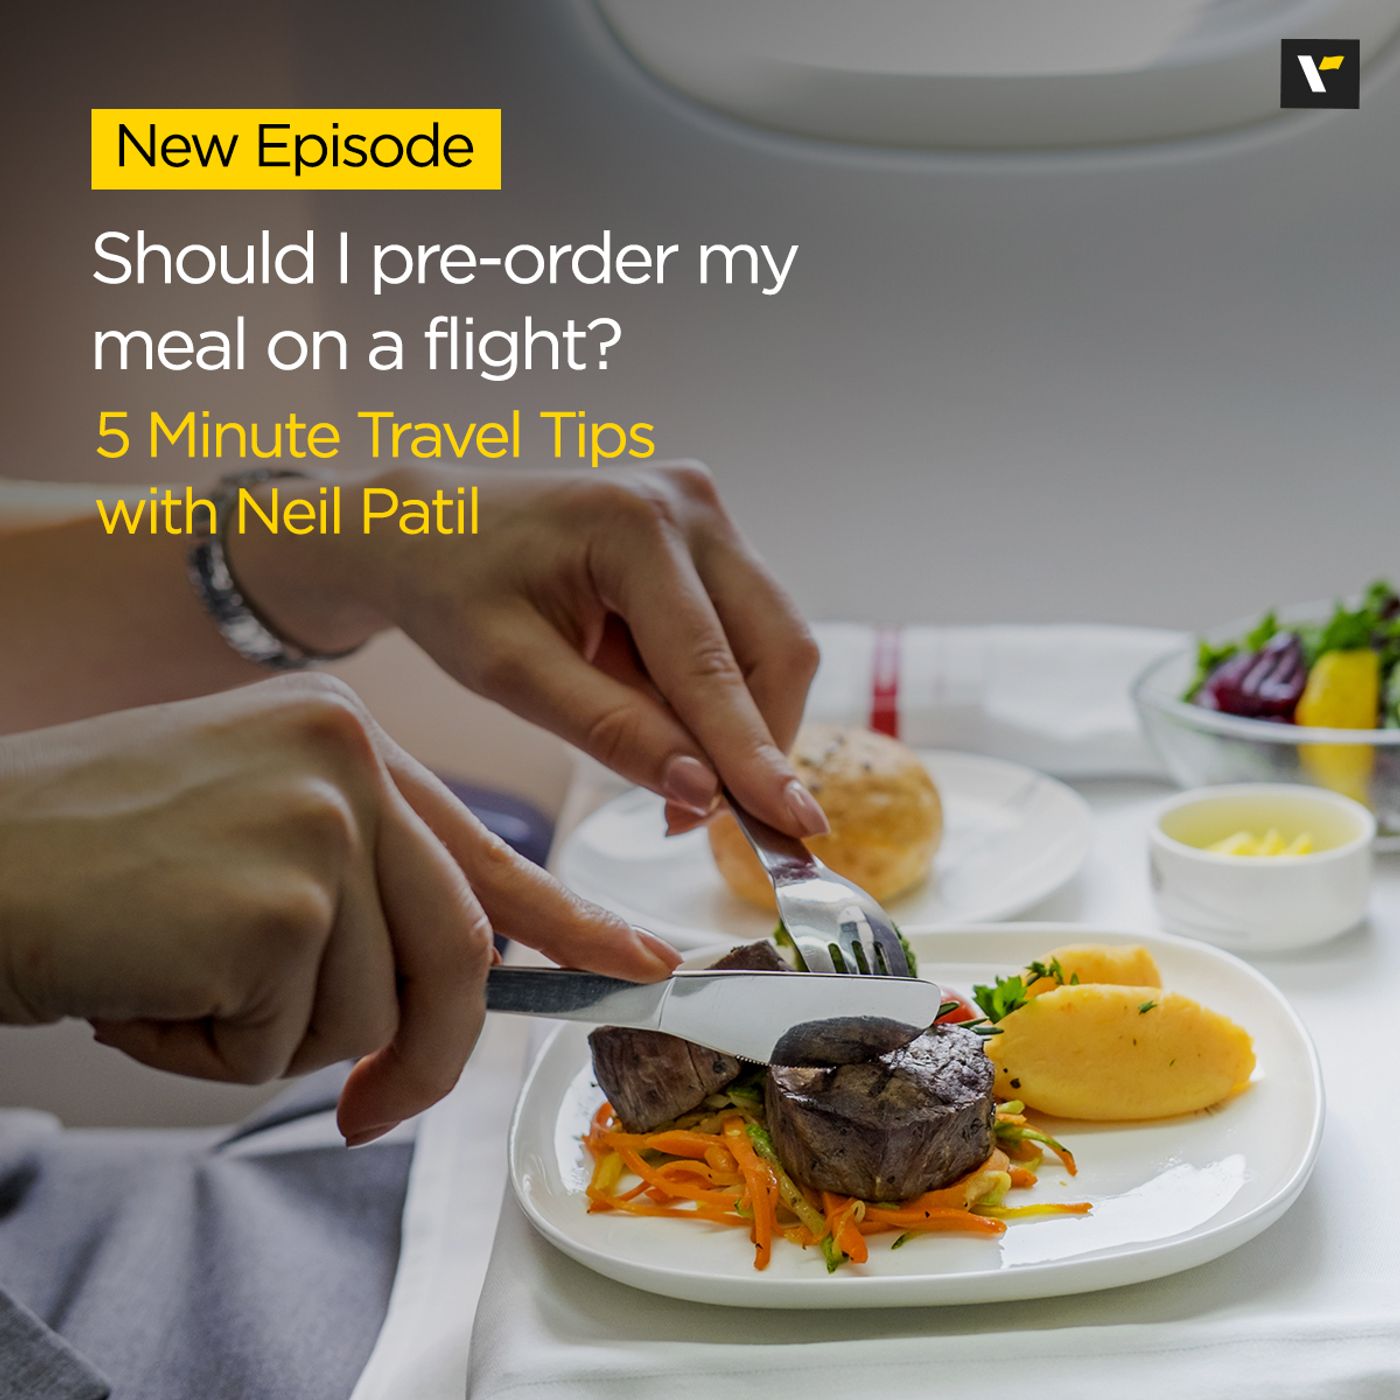 Should I pre-order my meal on a flight?